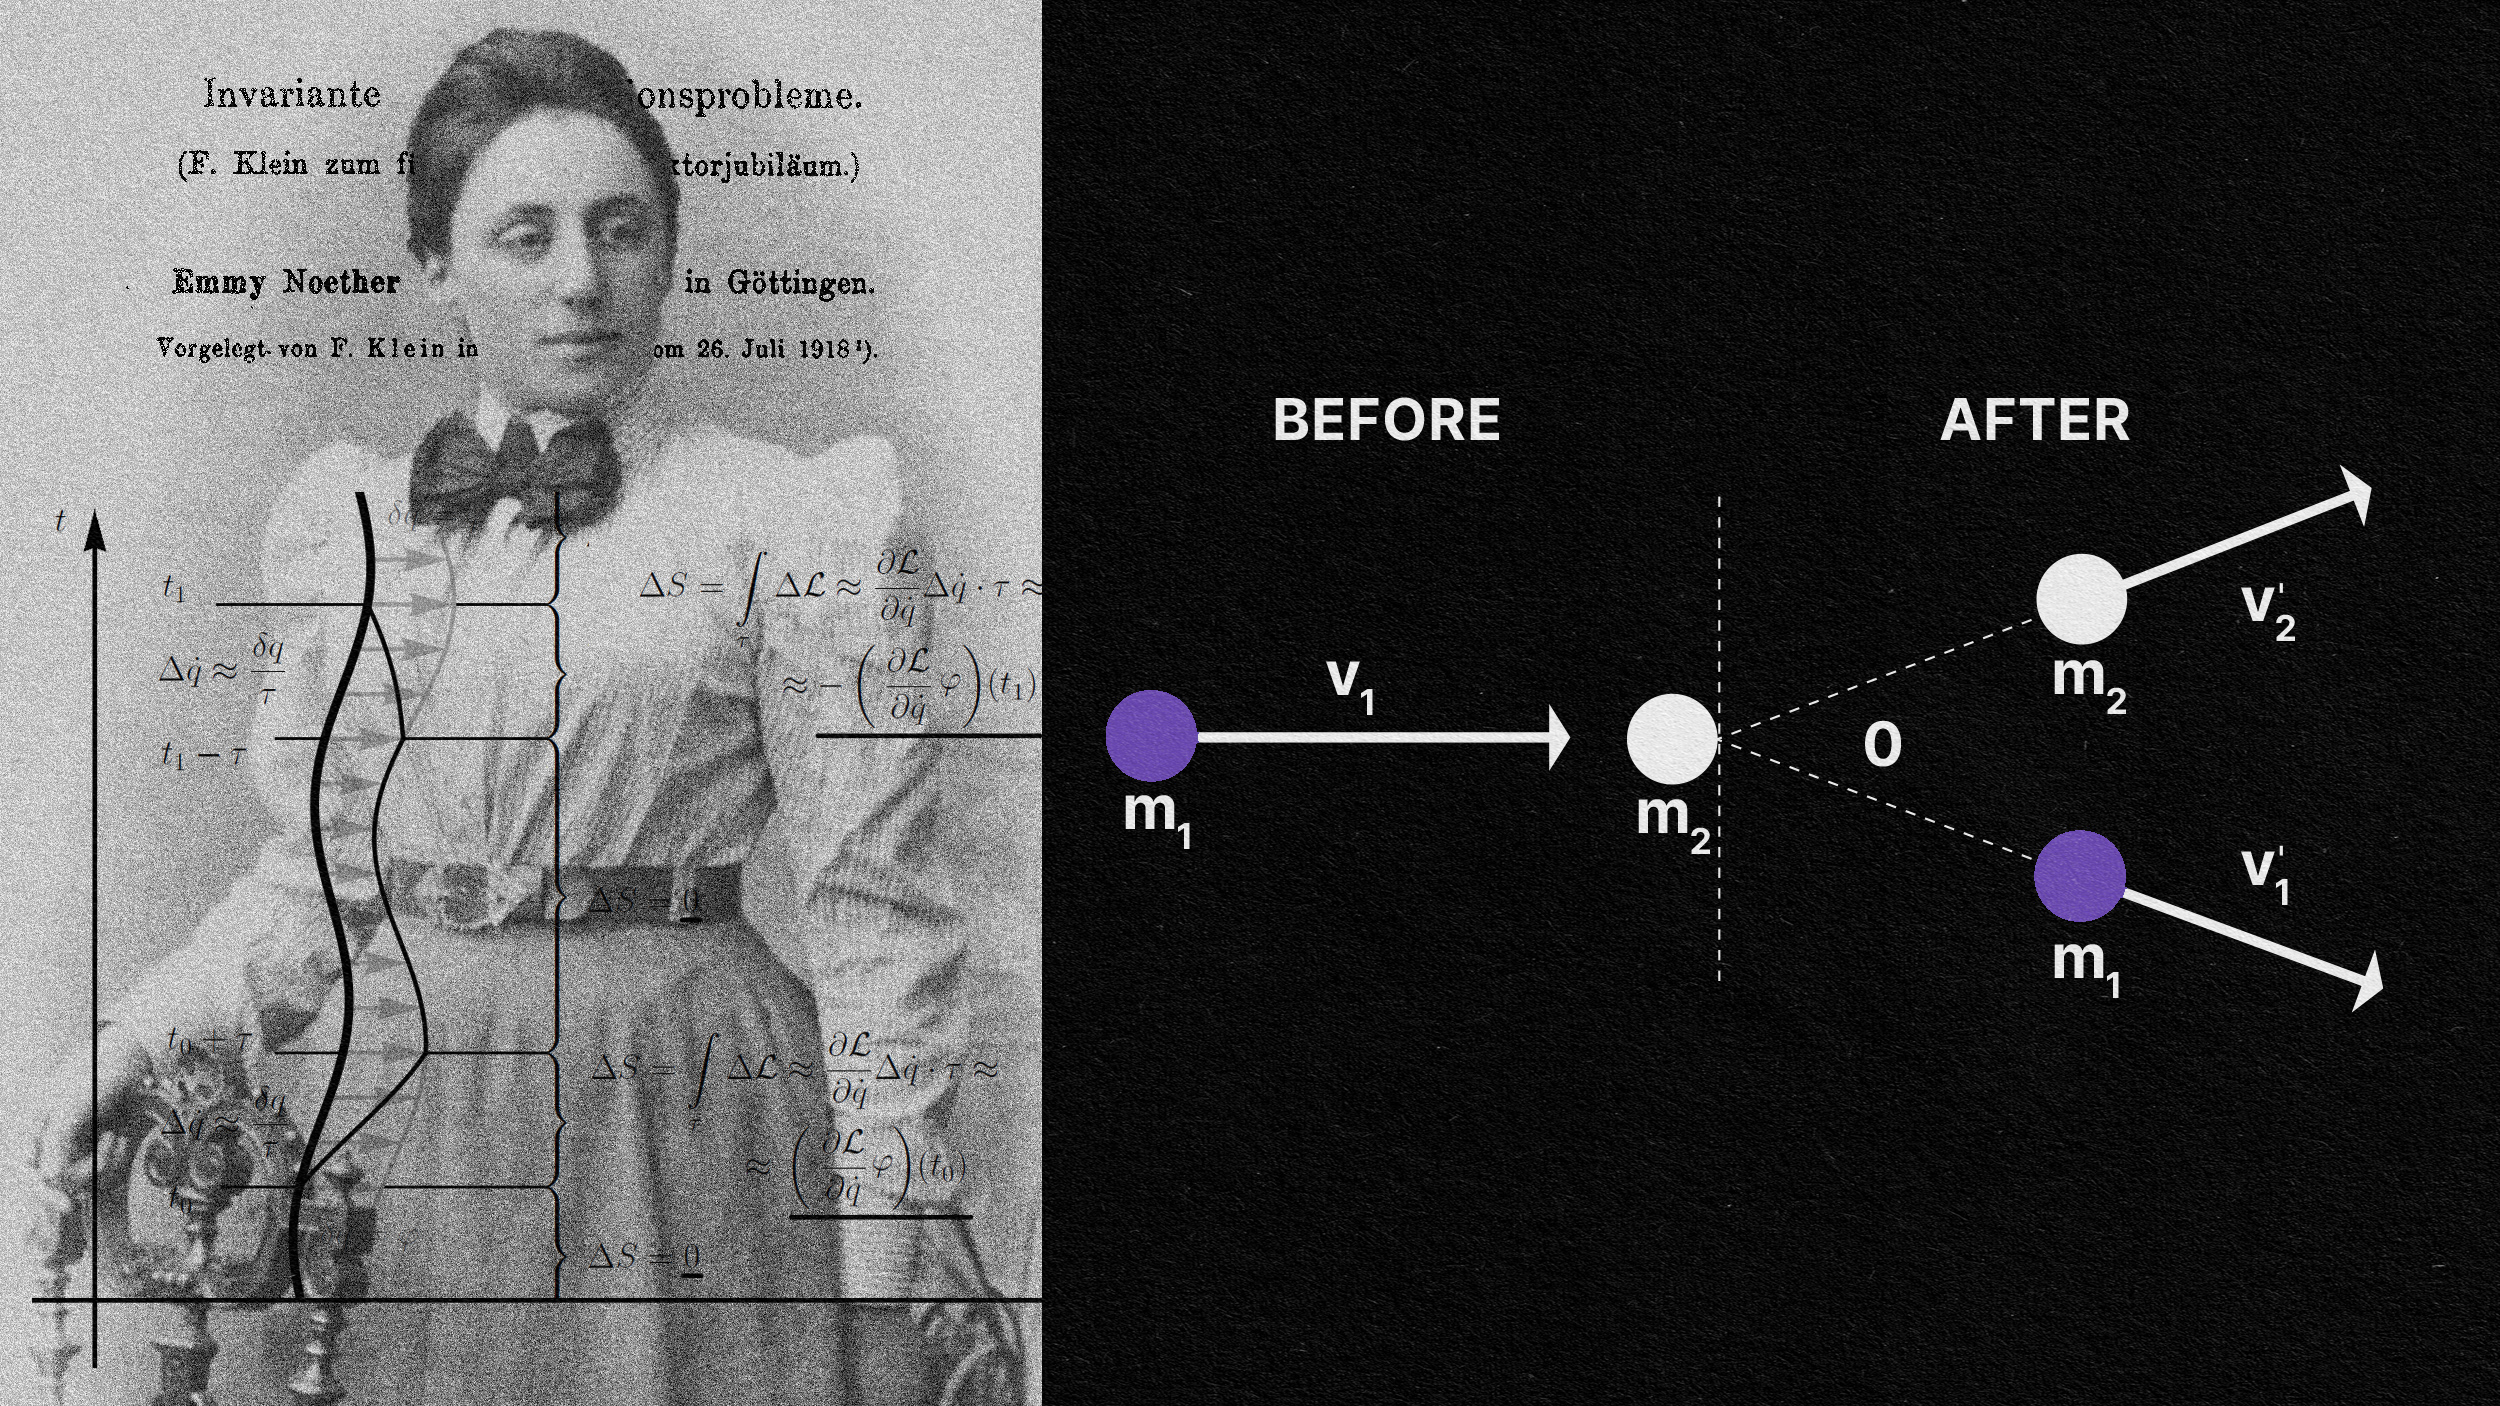 A split image showing Emmy Noether with equations on the left, and a "before and after" physics diagram illustrating symmetry conserved quantity on the right.